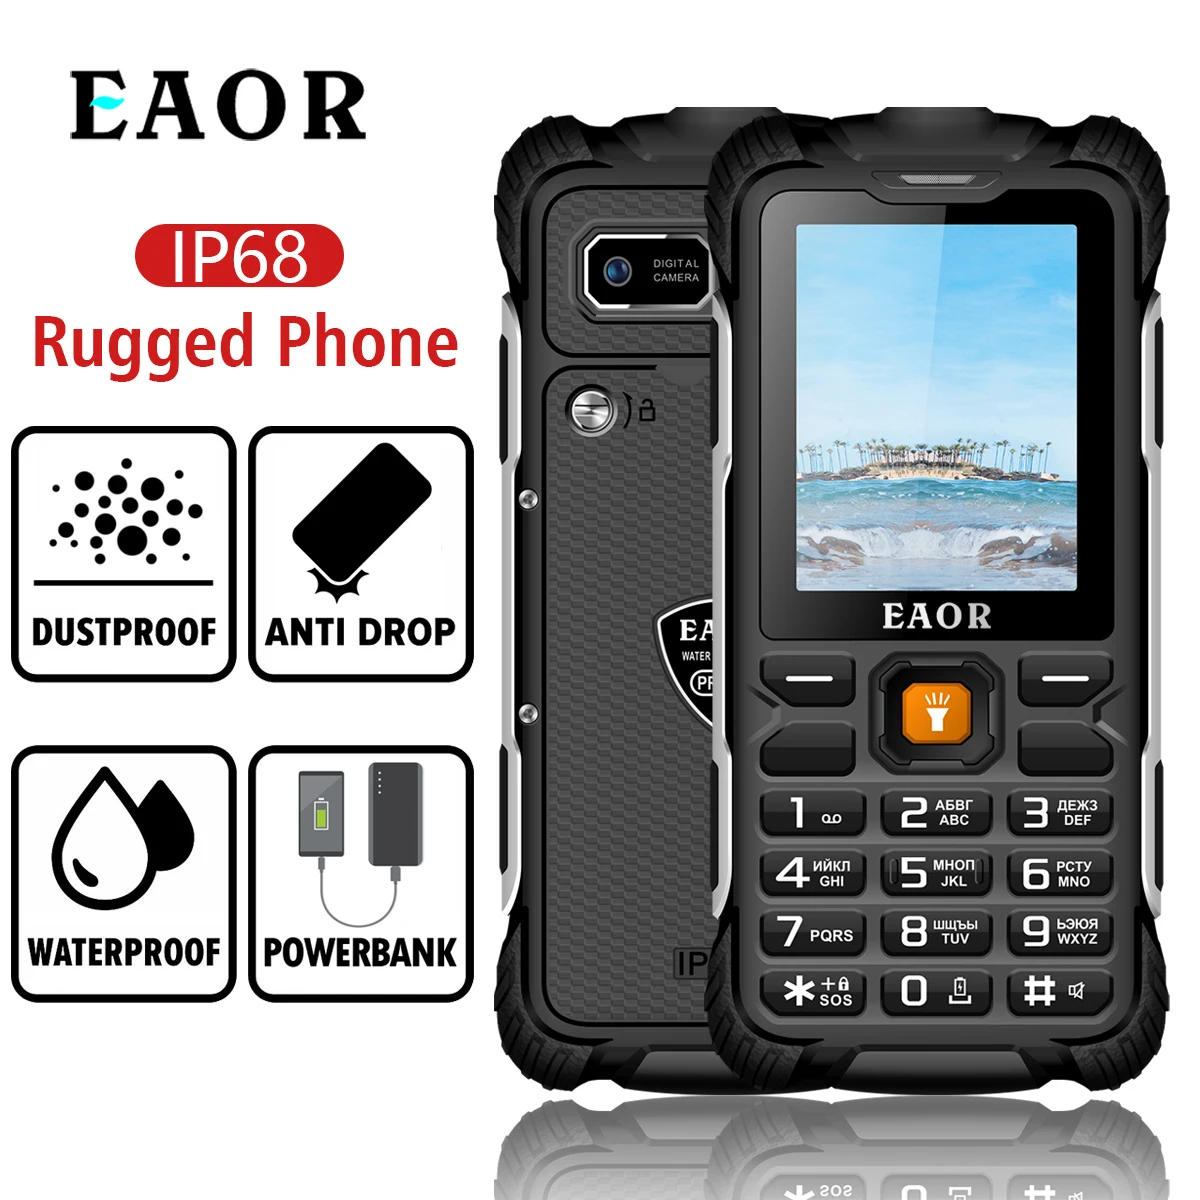 EAOR Dual SIM Card 2G Rugged Phone IP68 Water/Dust-proof Feature Phone 3000mAh Battery Reverse Charging Keypad Phone with Torch